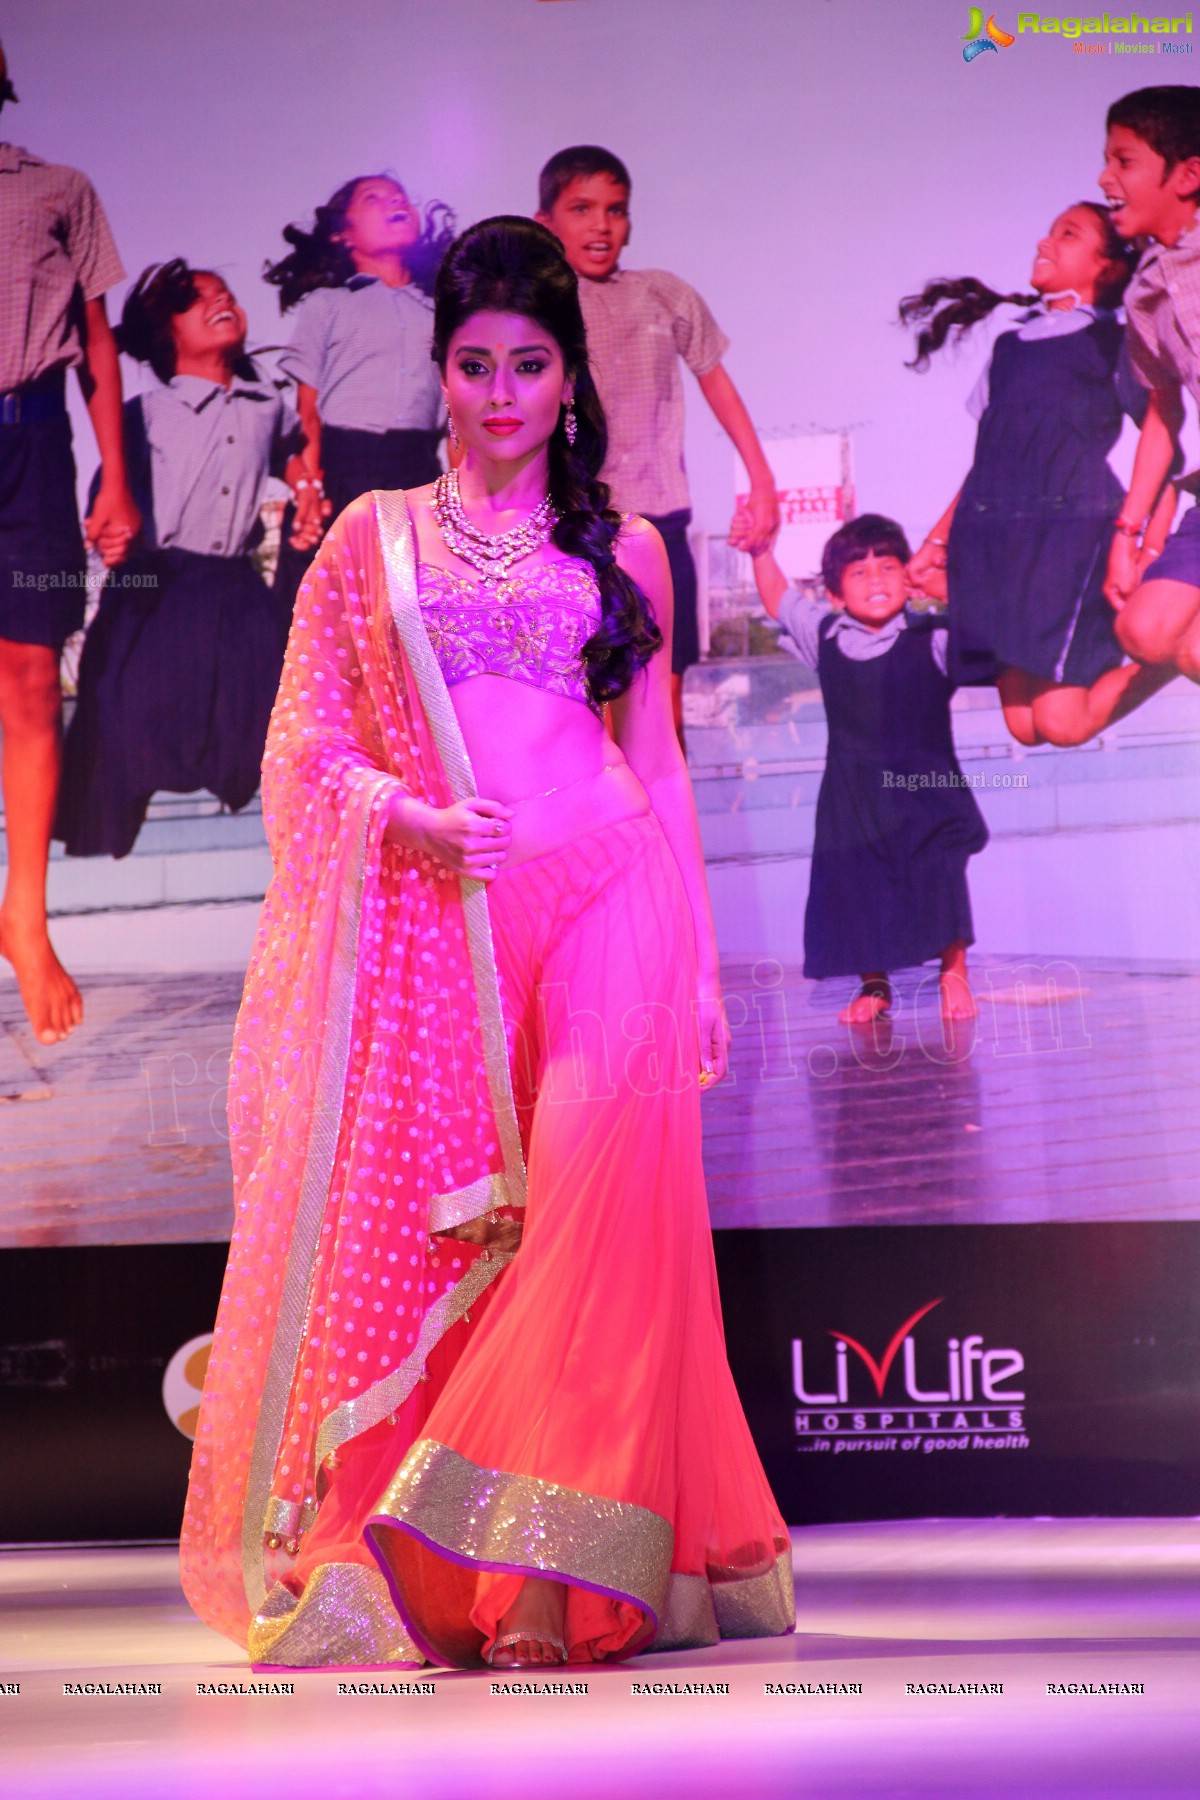 Youth NGO Passionate Foundation Charity Show